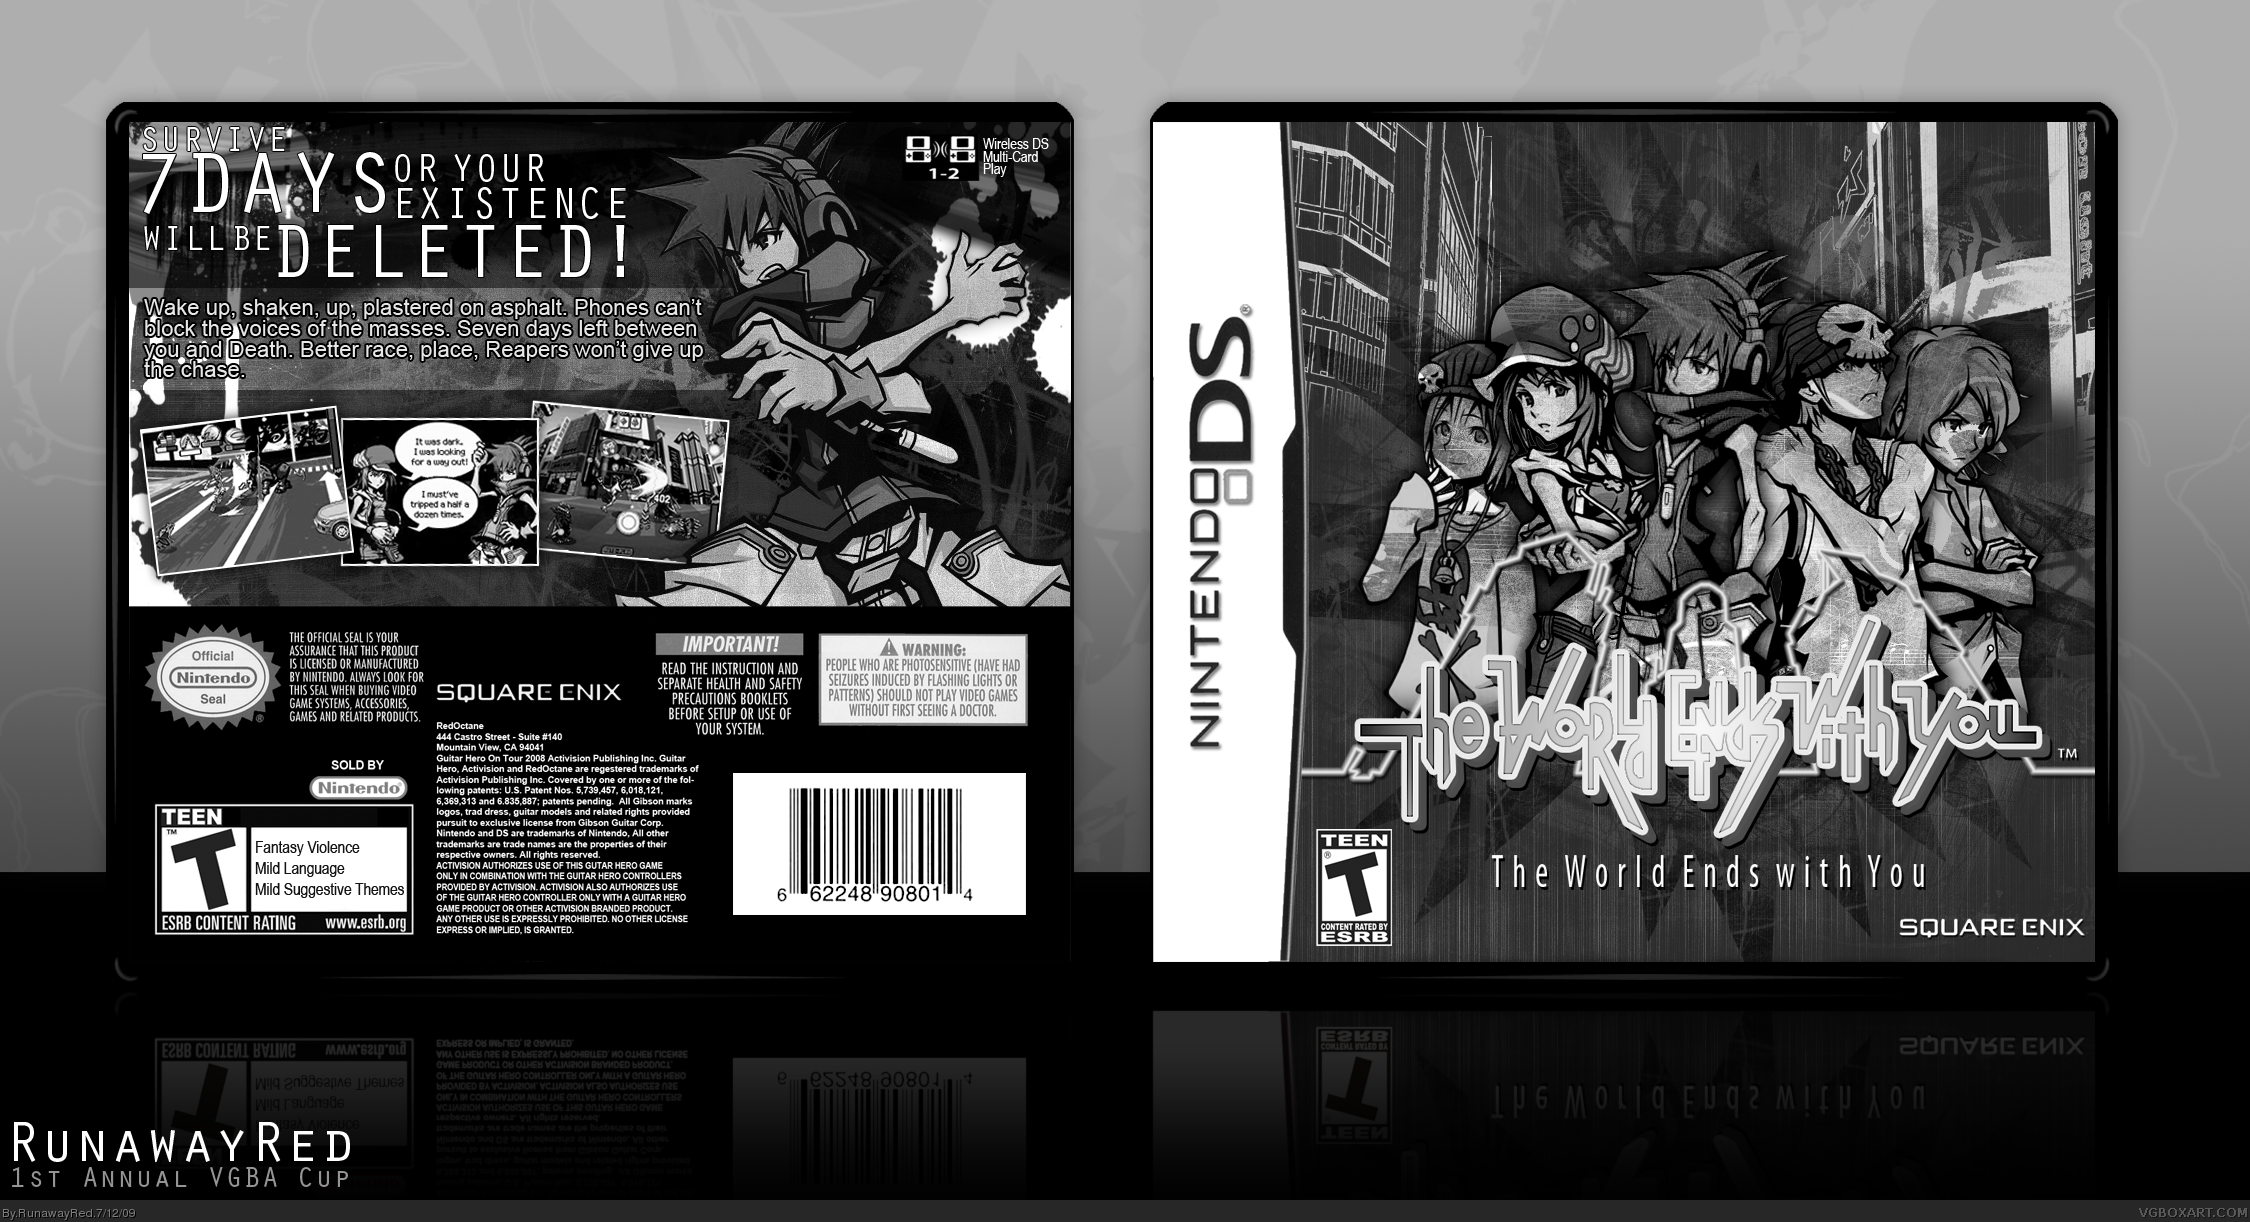 The World Ends With You box cover